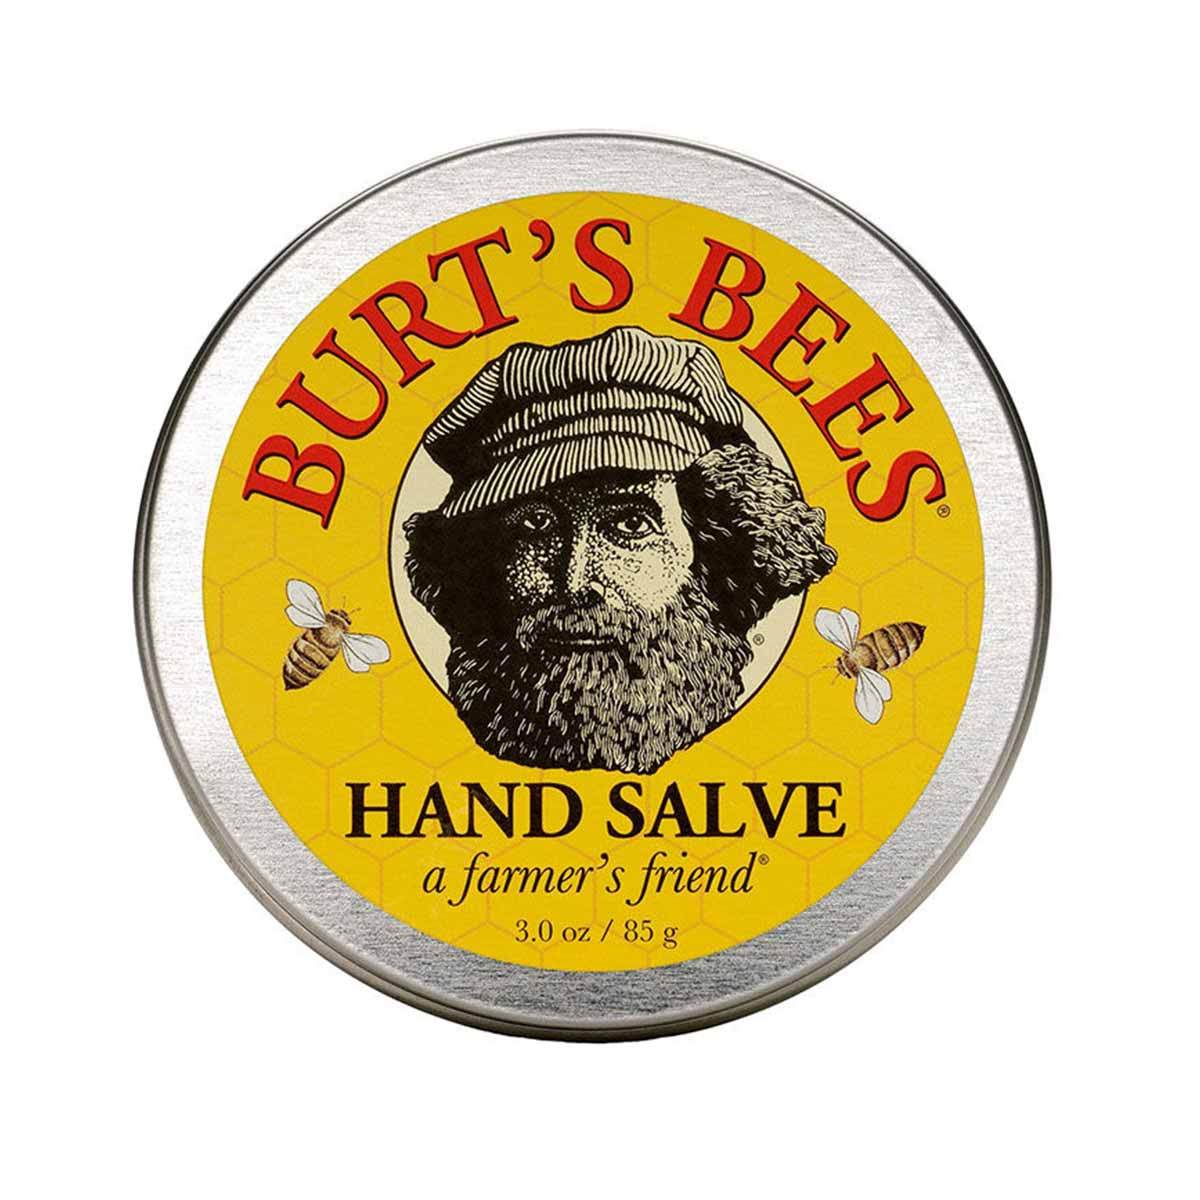 Primary image of Hand Salve